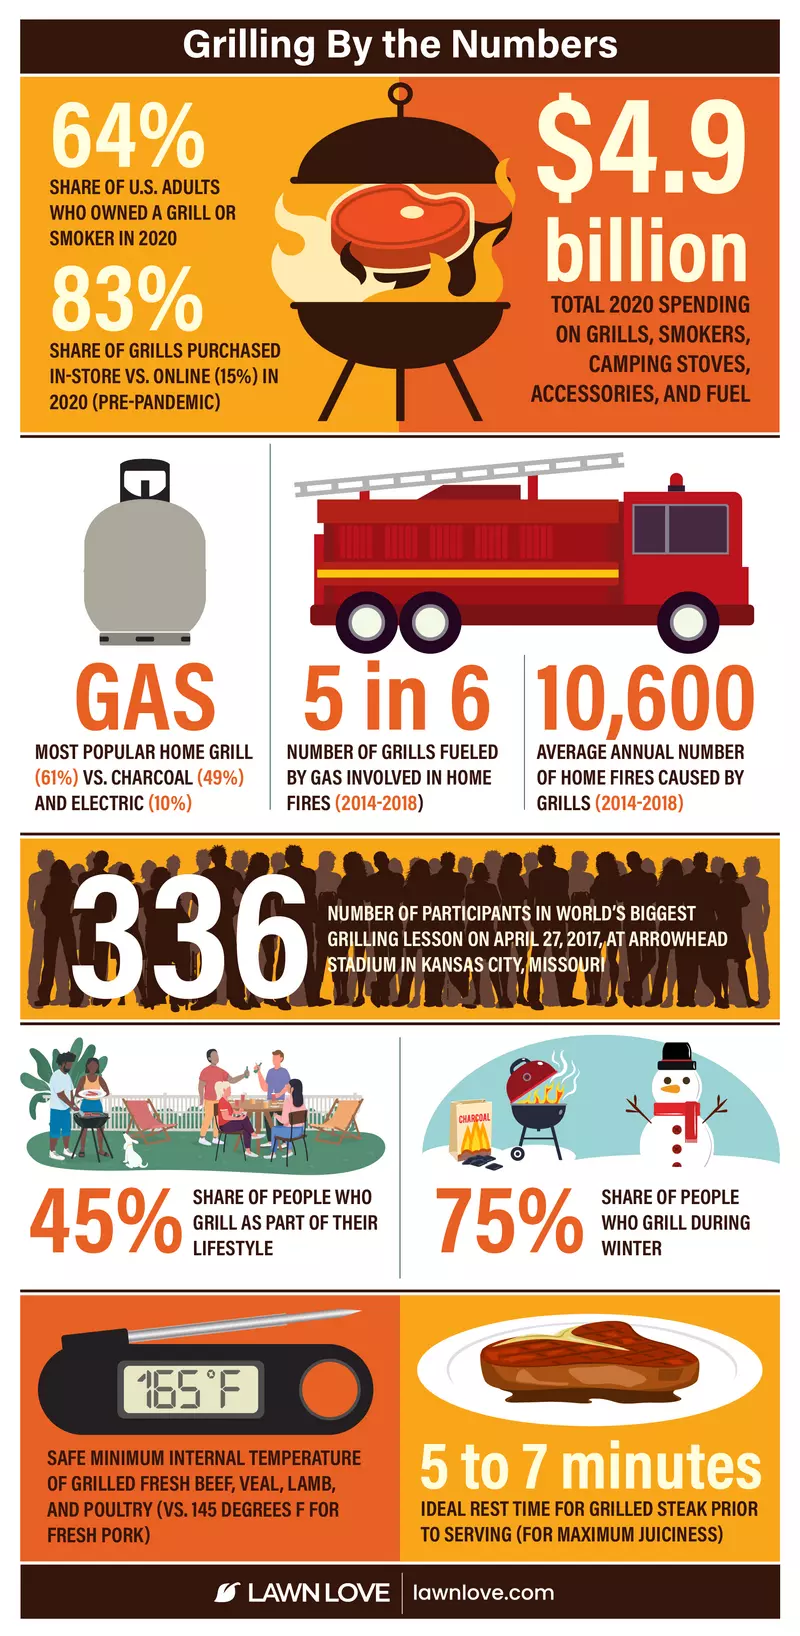 Infographic showing percentages and numbers related to grilling and fire-related statistics